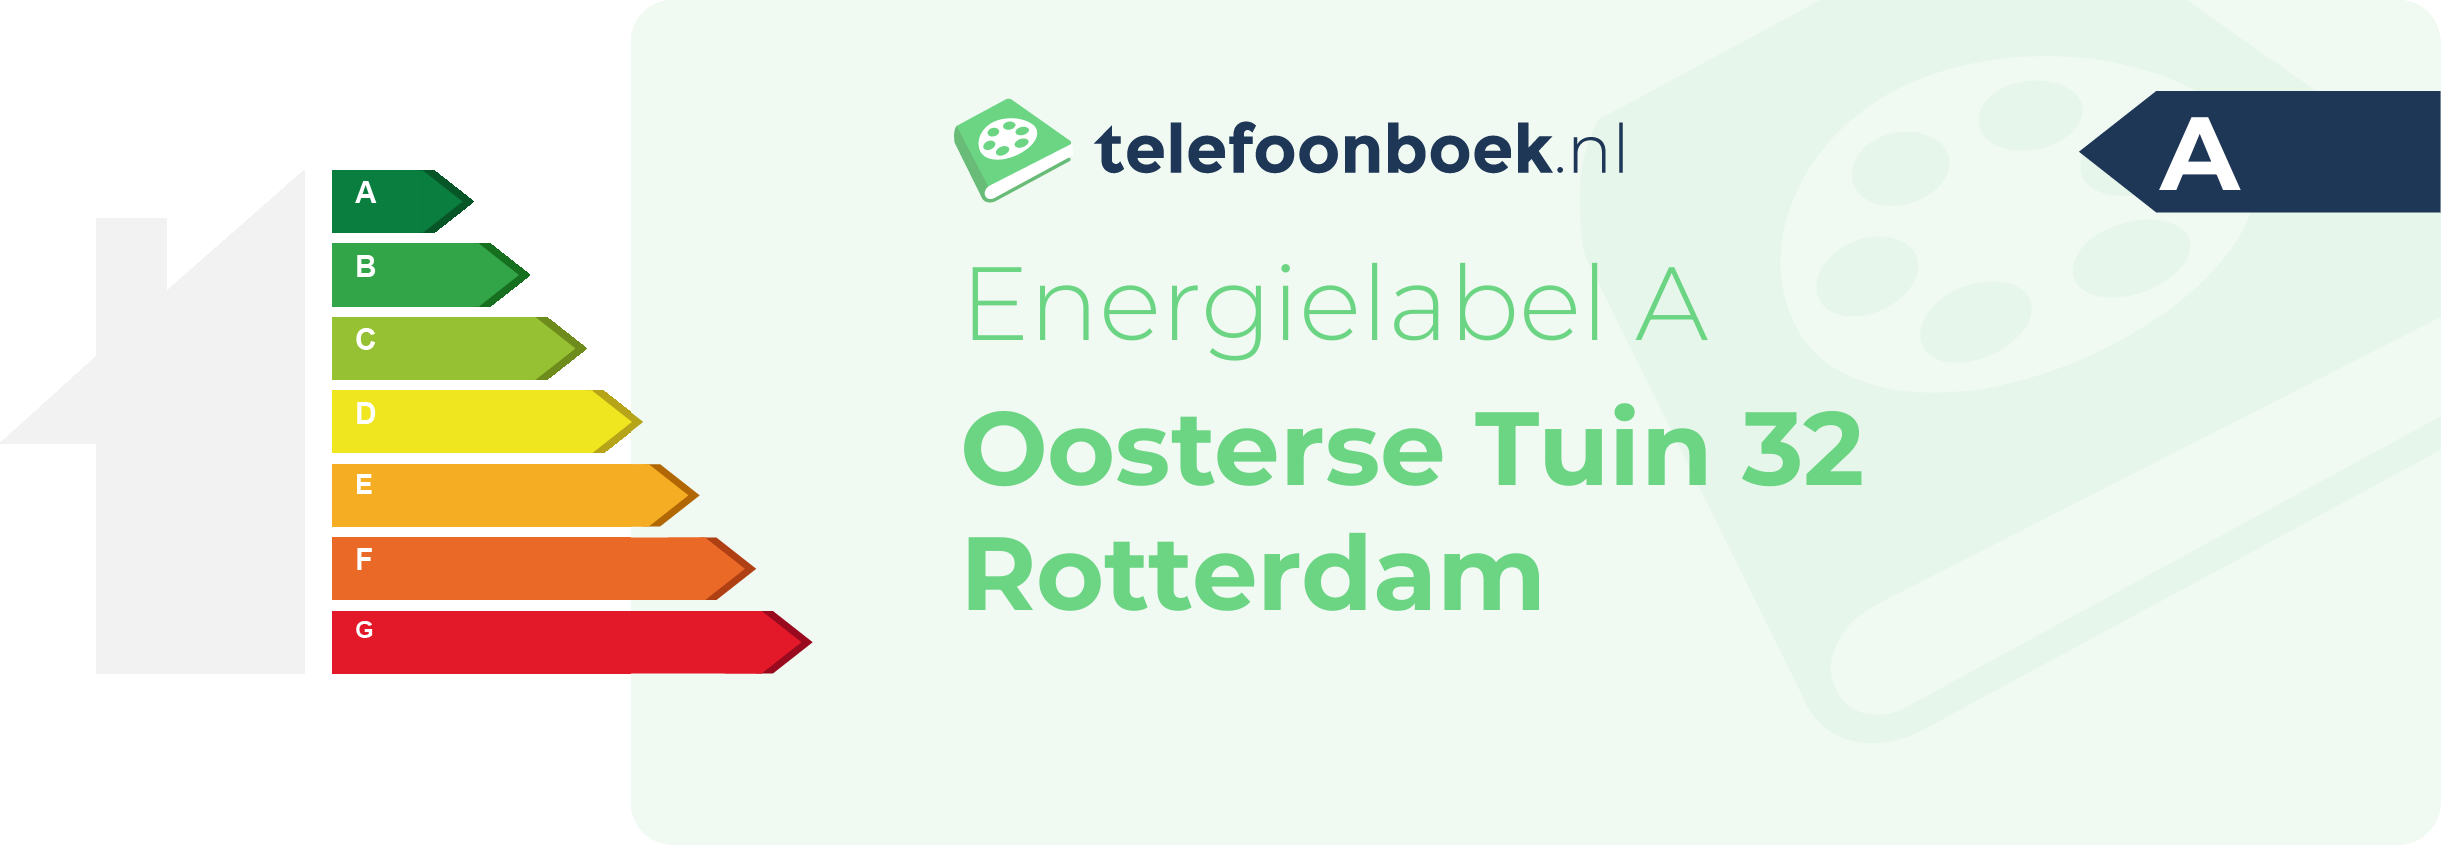 Energielabel Oosterse Tuin 32 Rotterdam